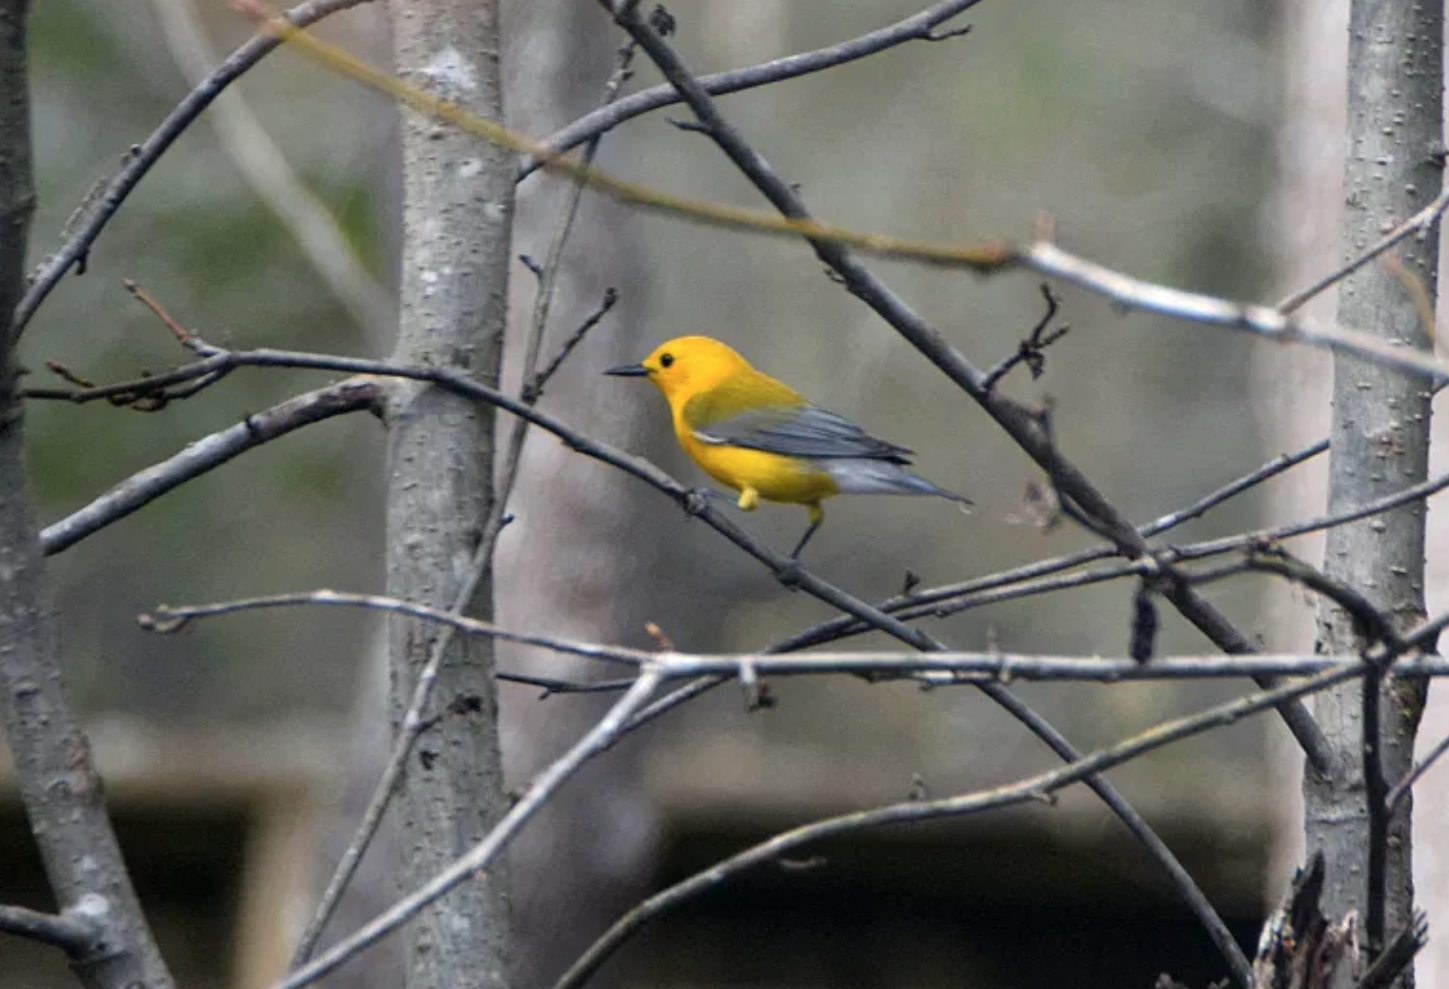 Interesting bird life is common along the river. This is a Prothonotary Warbler.